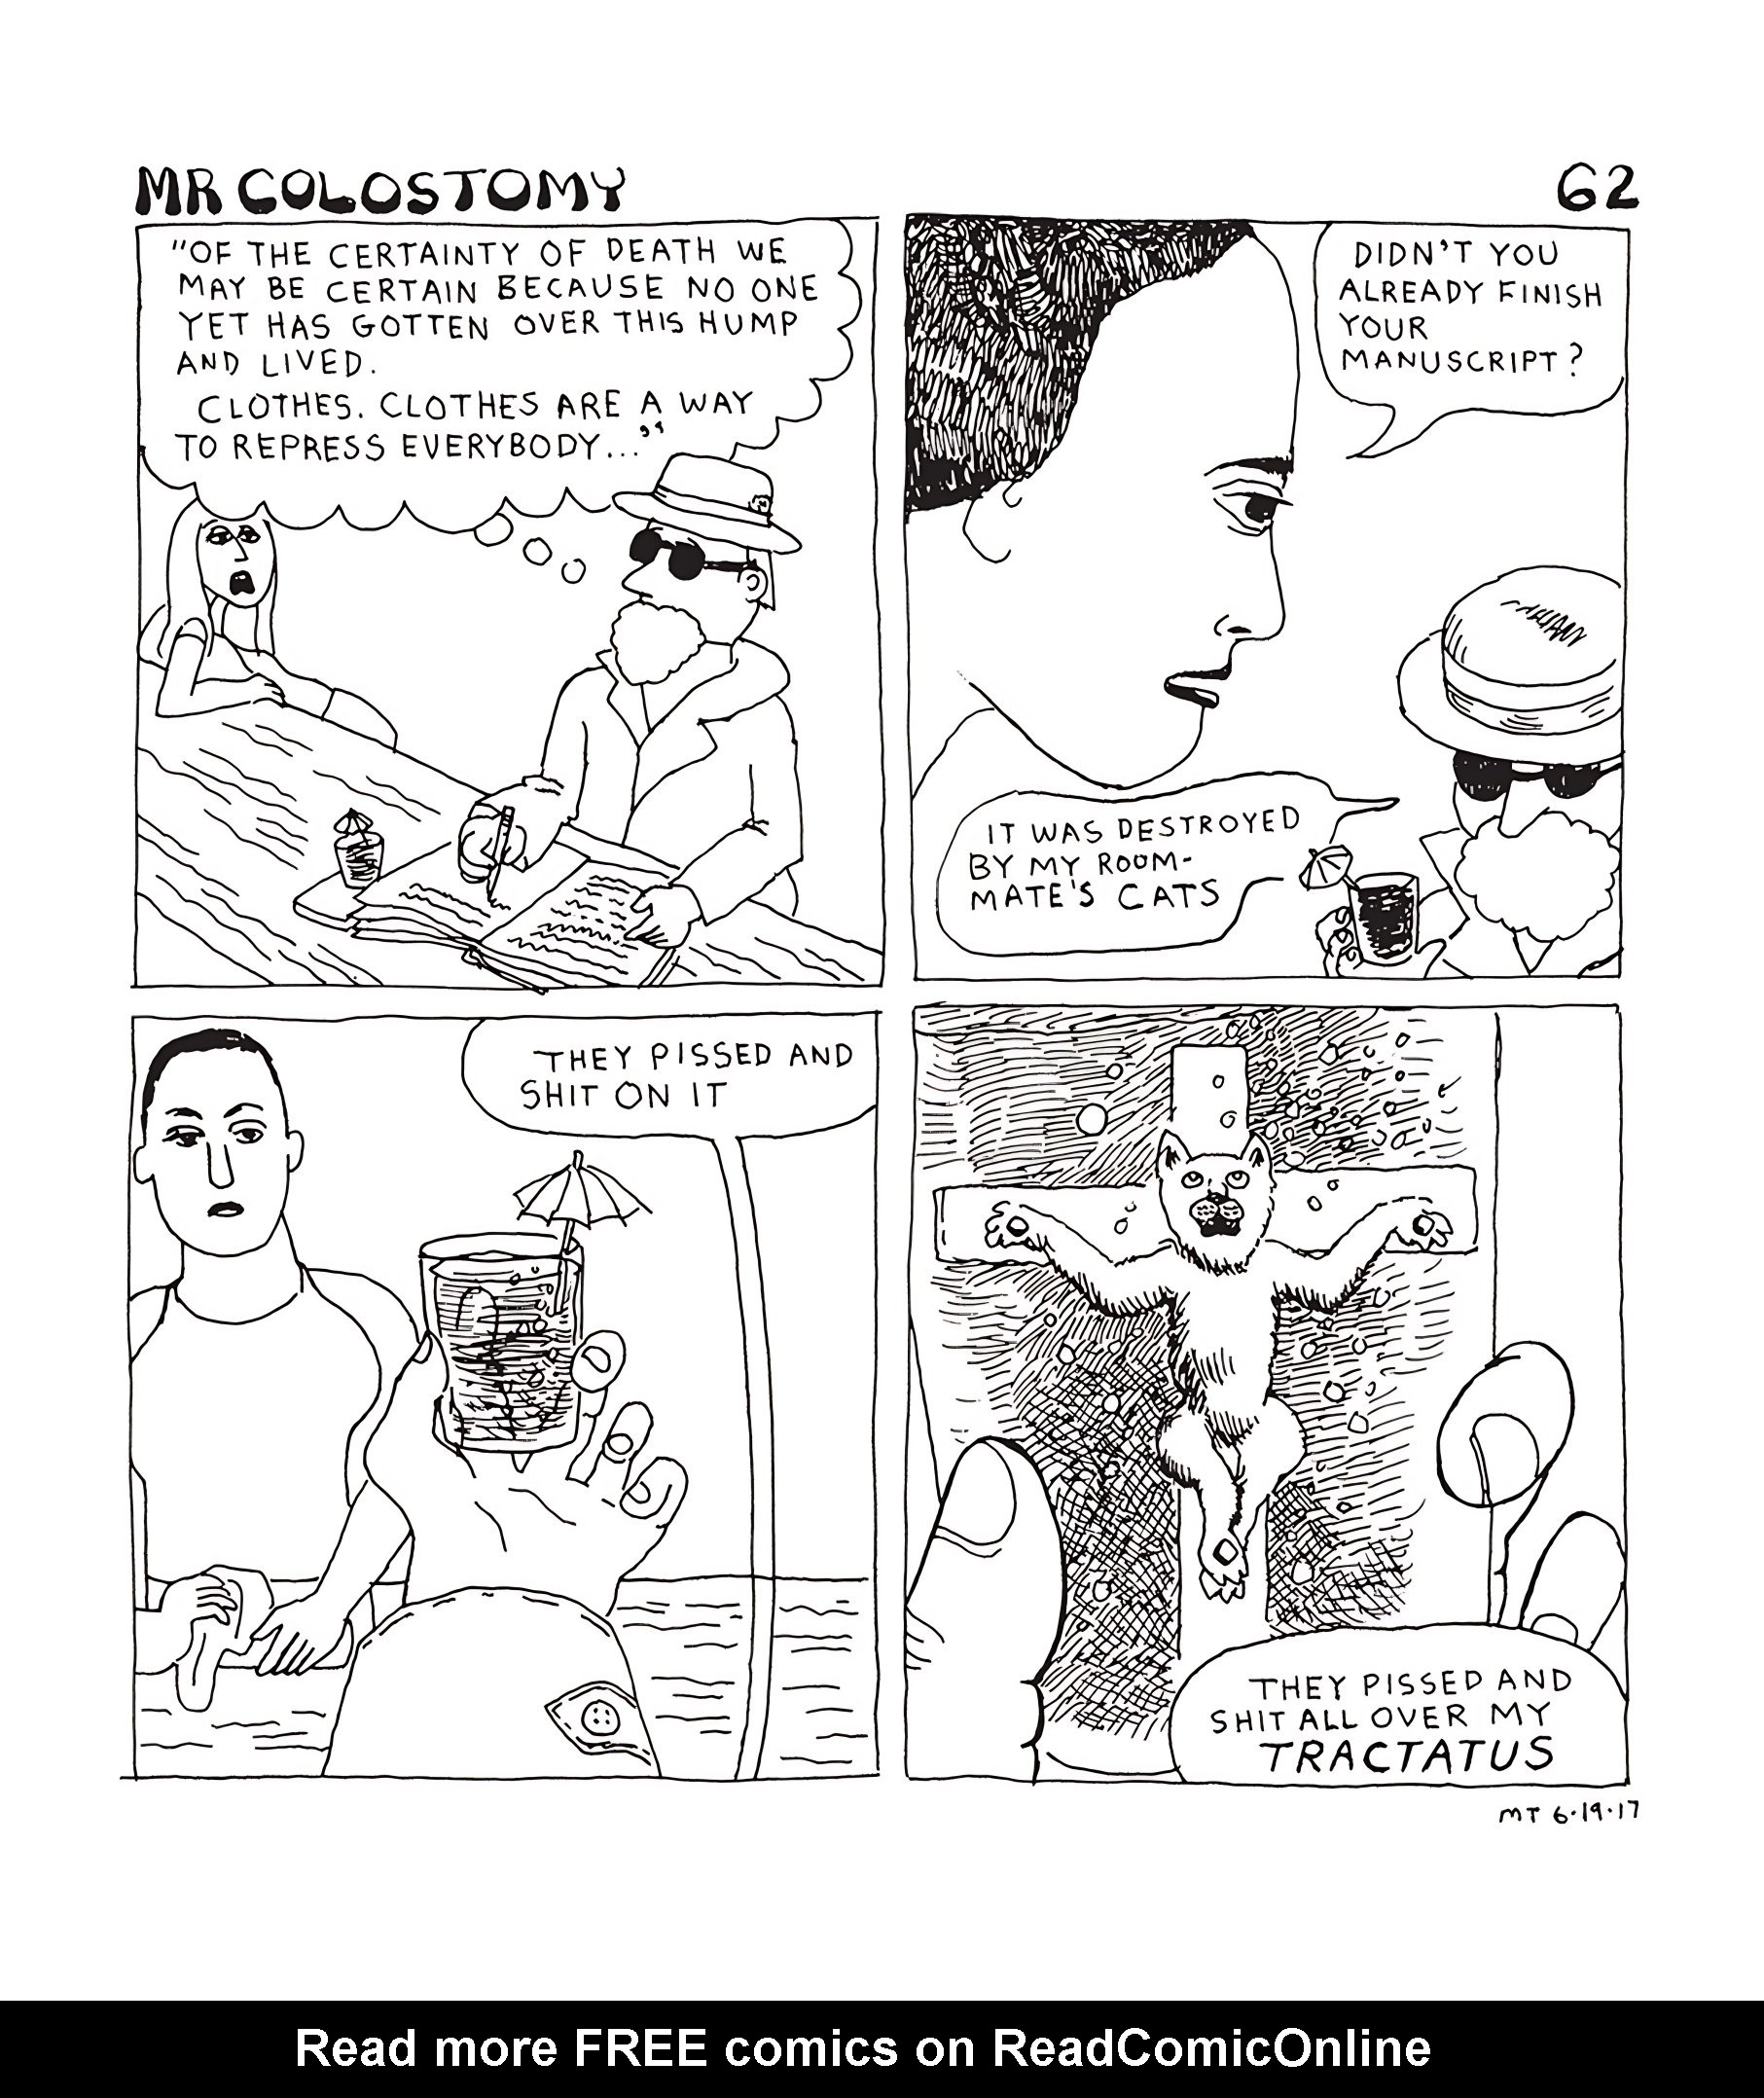 Read online Mr. Colostomy comic -  Issue # TPB (Part 1) - 60